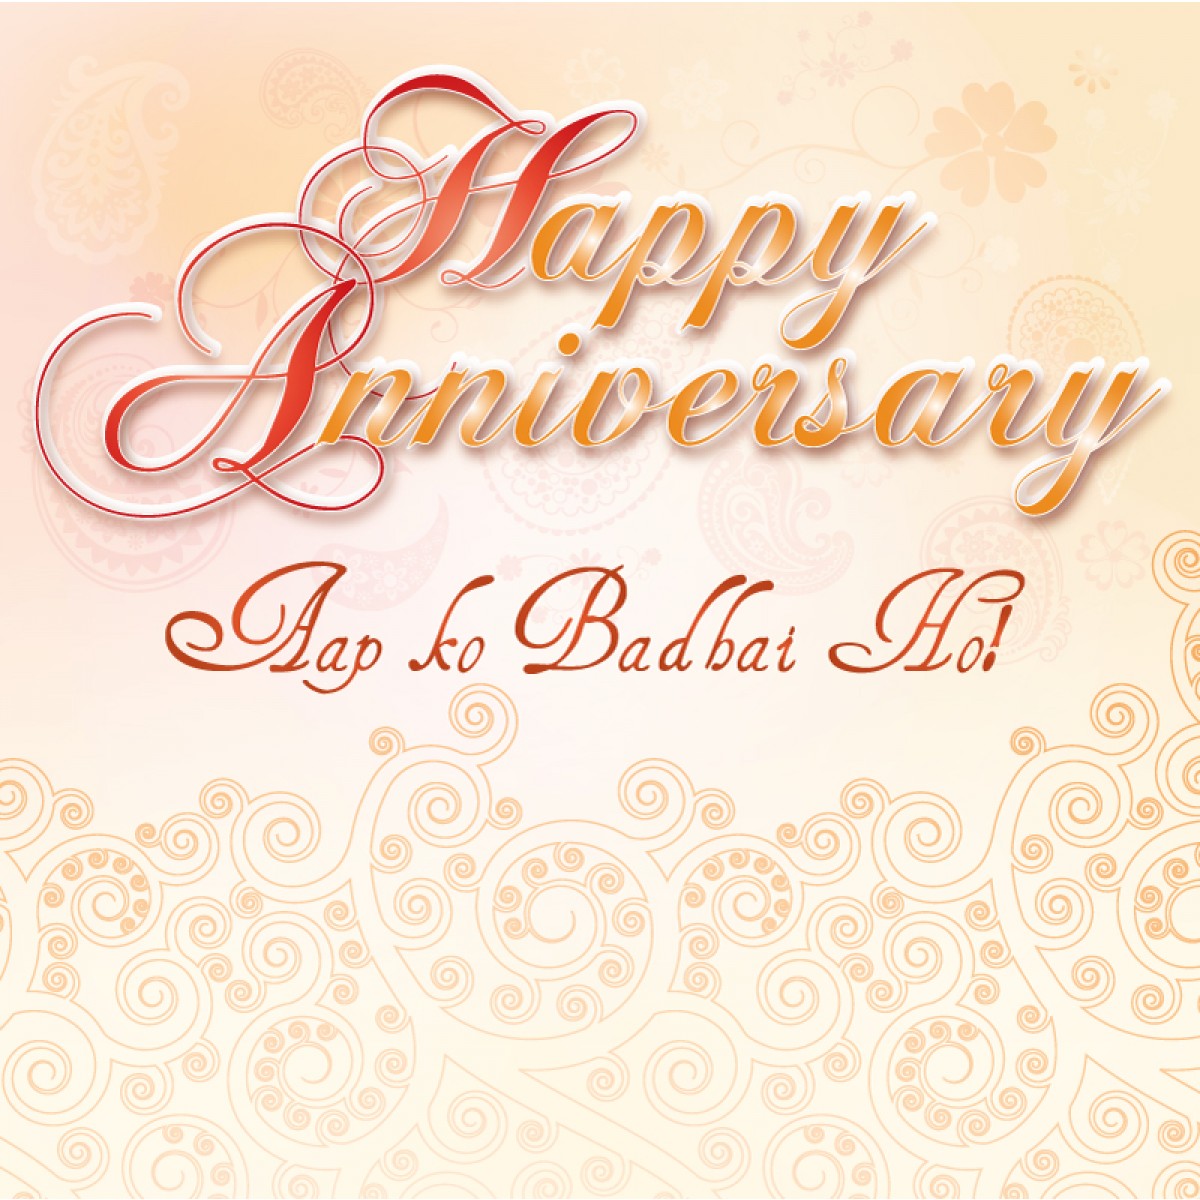 Happy Marriage Anniversary Greeting Cards HD Wallpaper 1080p